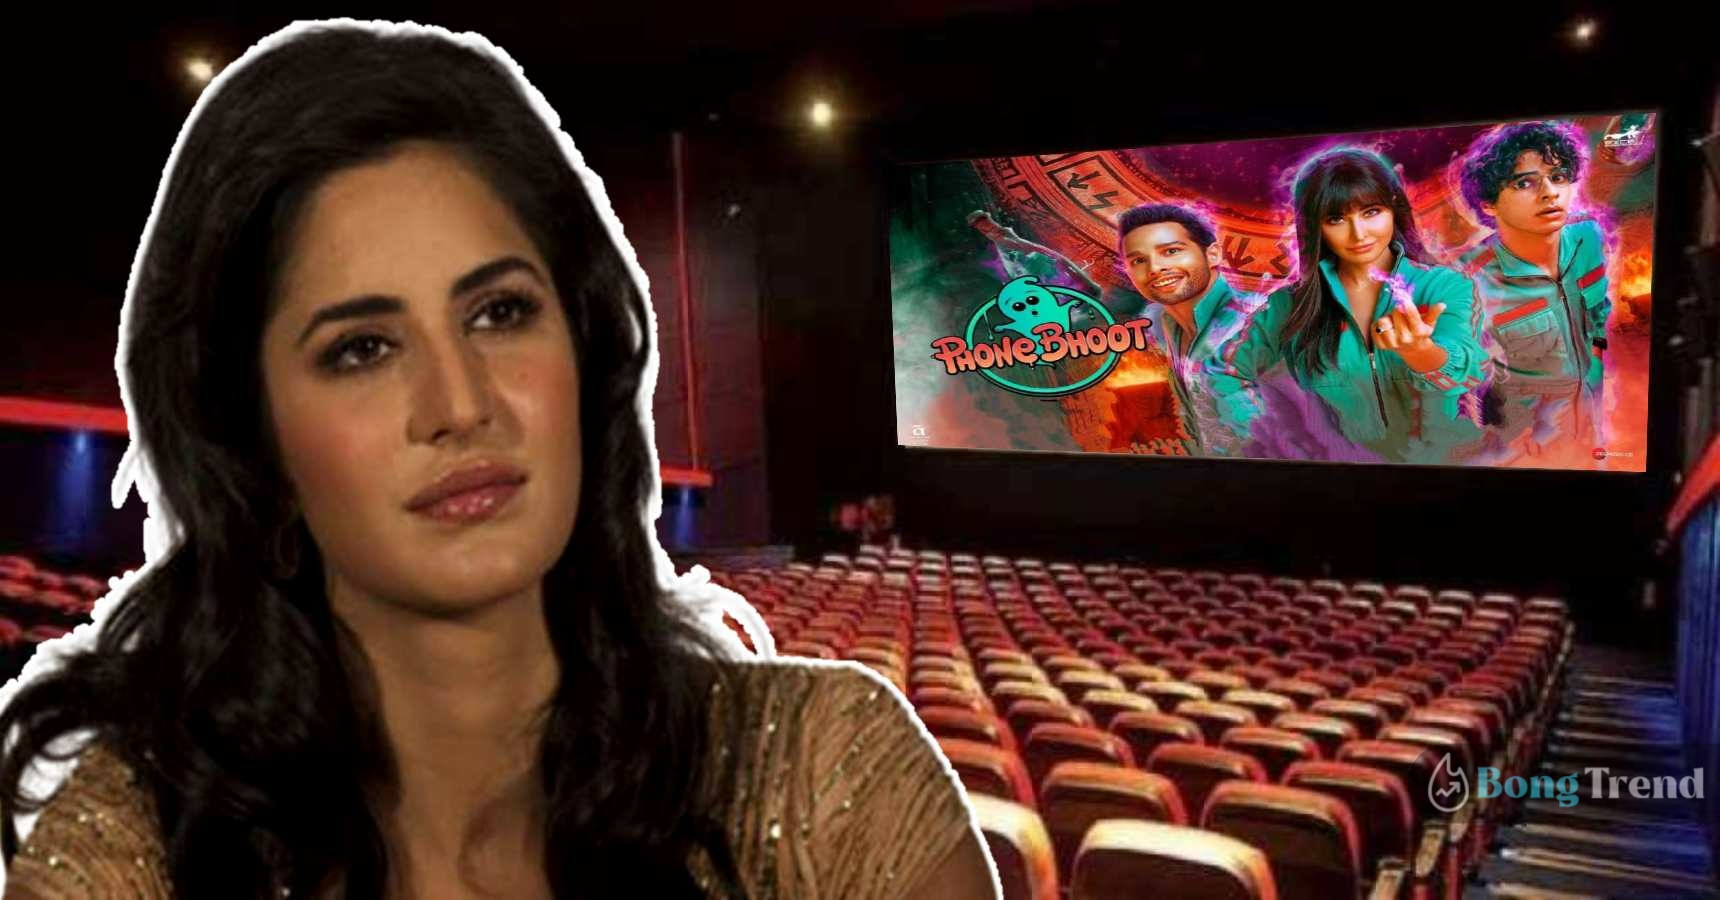 Bollywood Box Office Katrina Kaif Phone Booth became flop on starting days